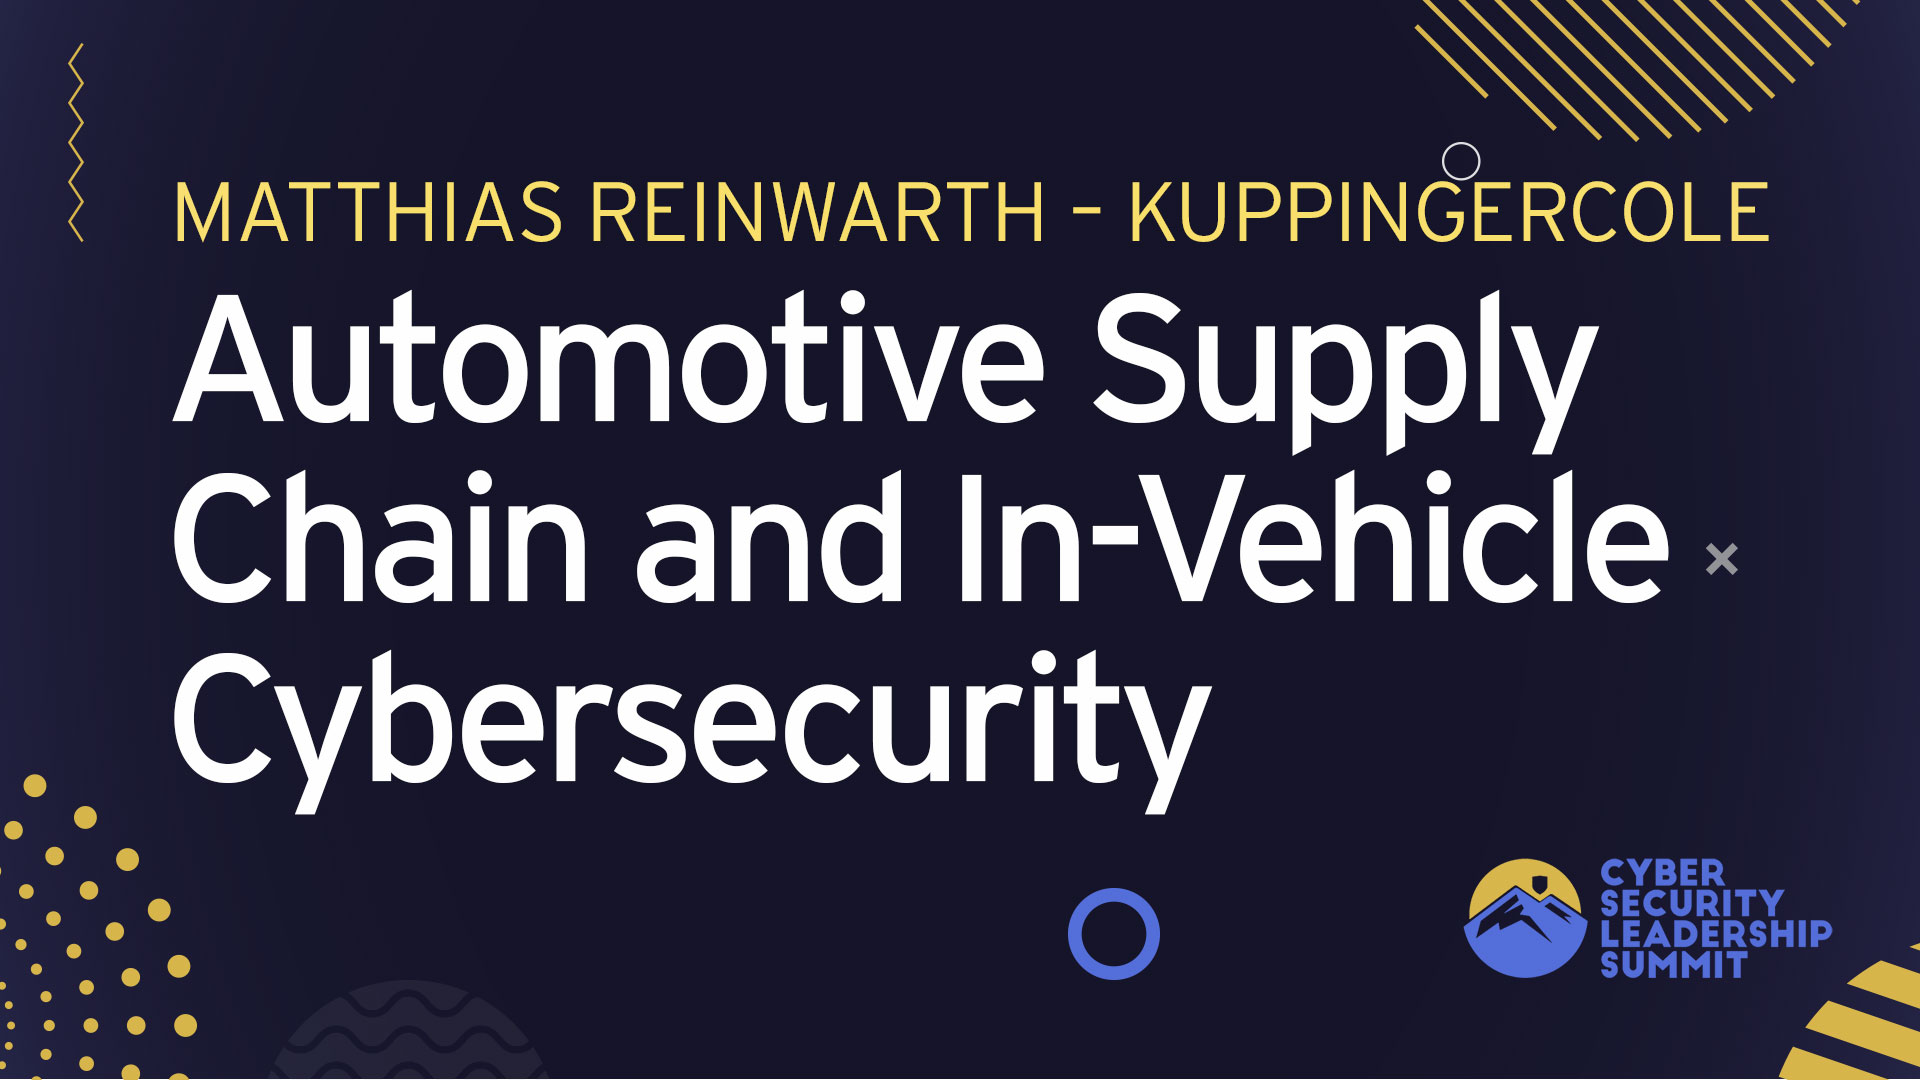 UNECE R 155: Security-by-Design for the Automotive Supply Chain and In-Vehicle Cybersecurity